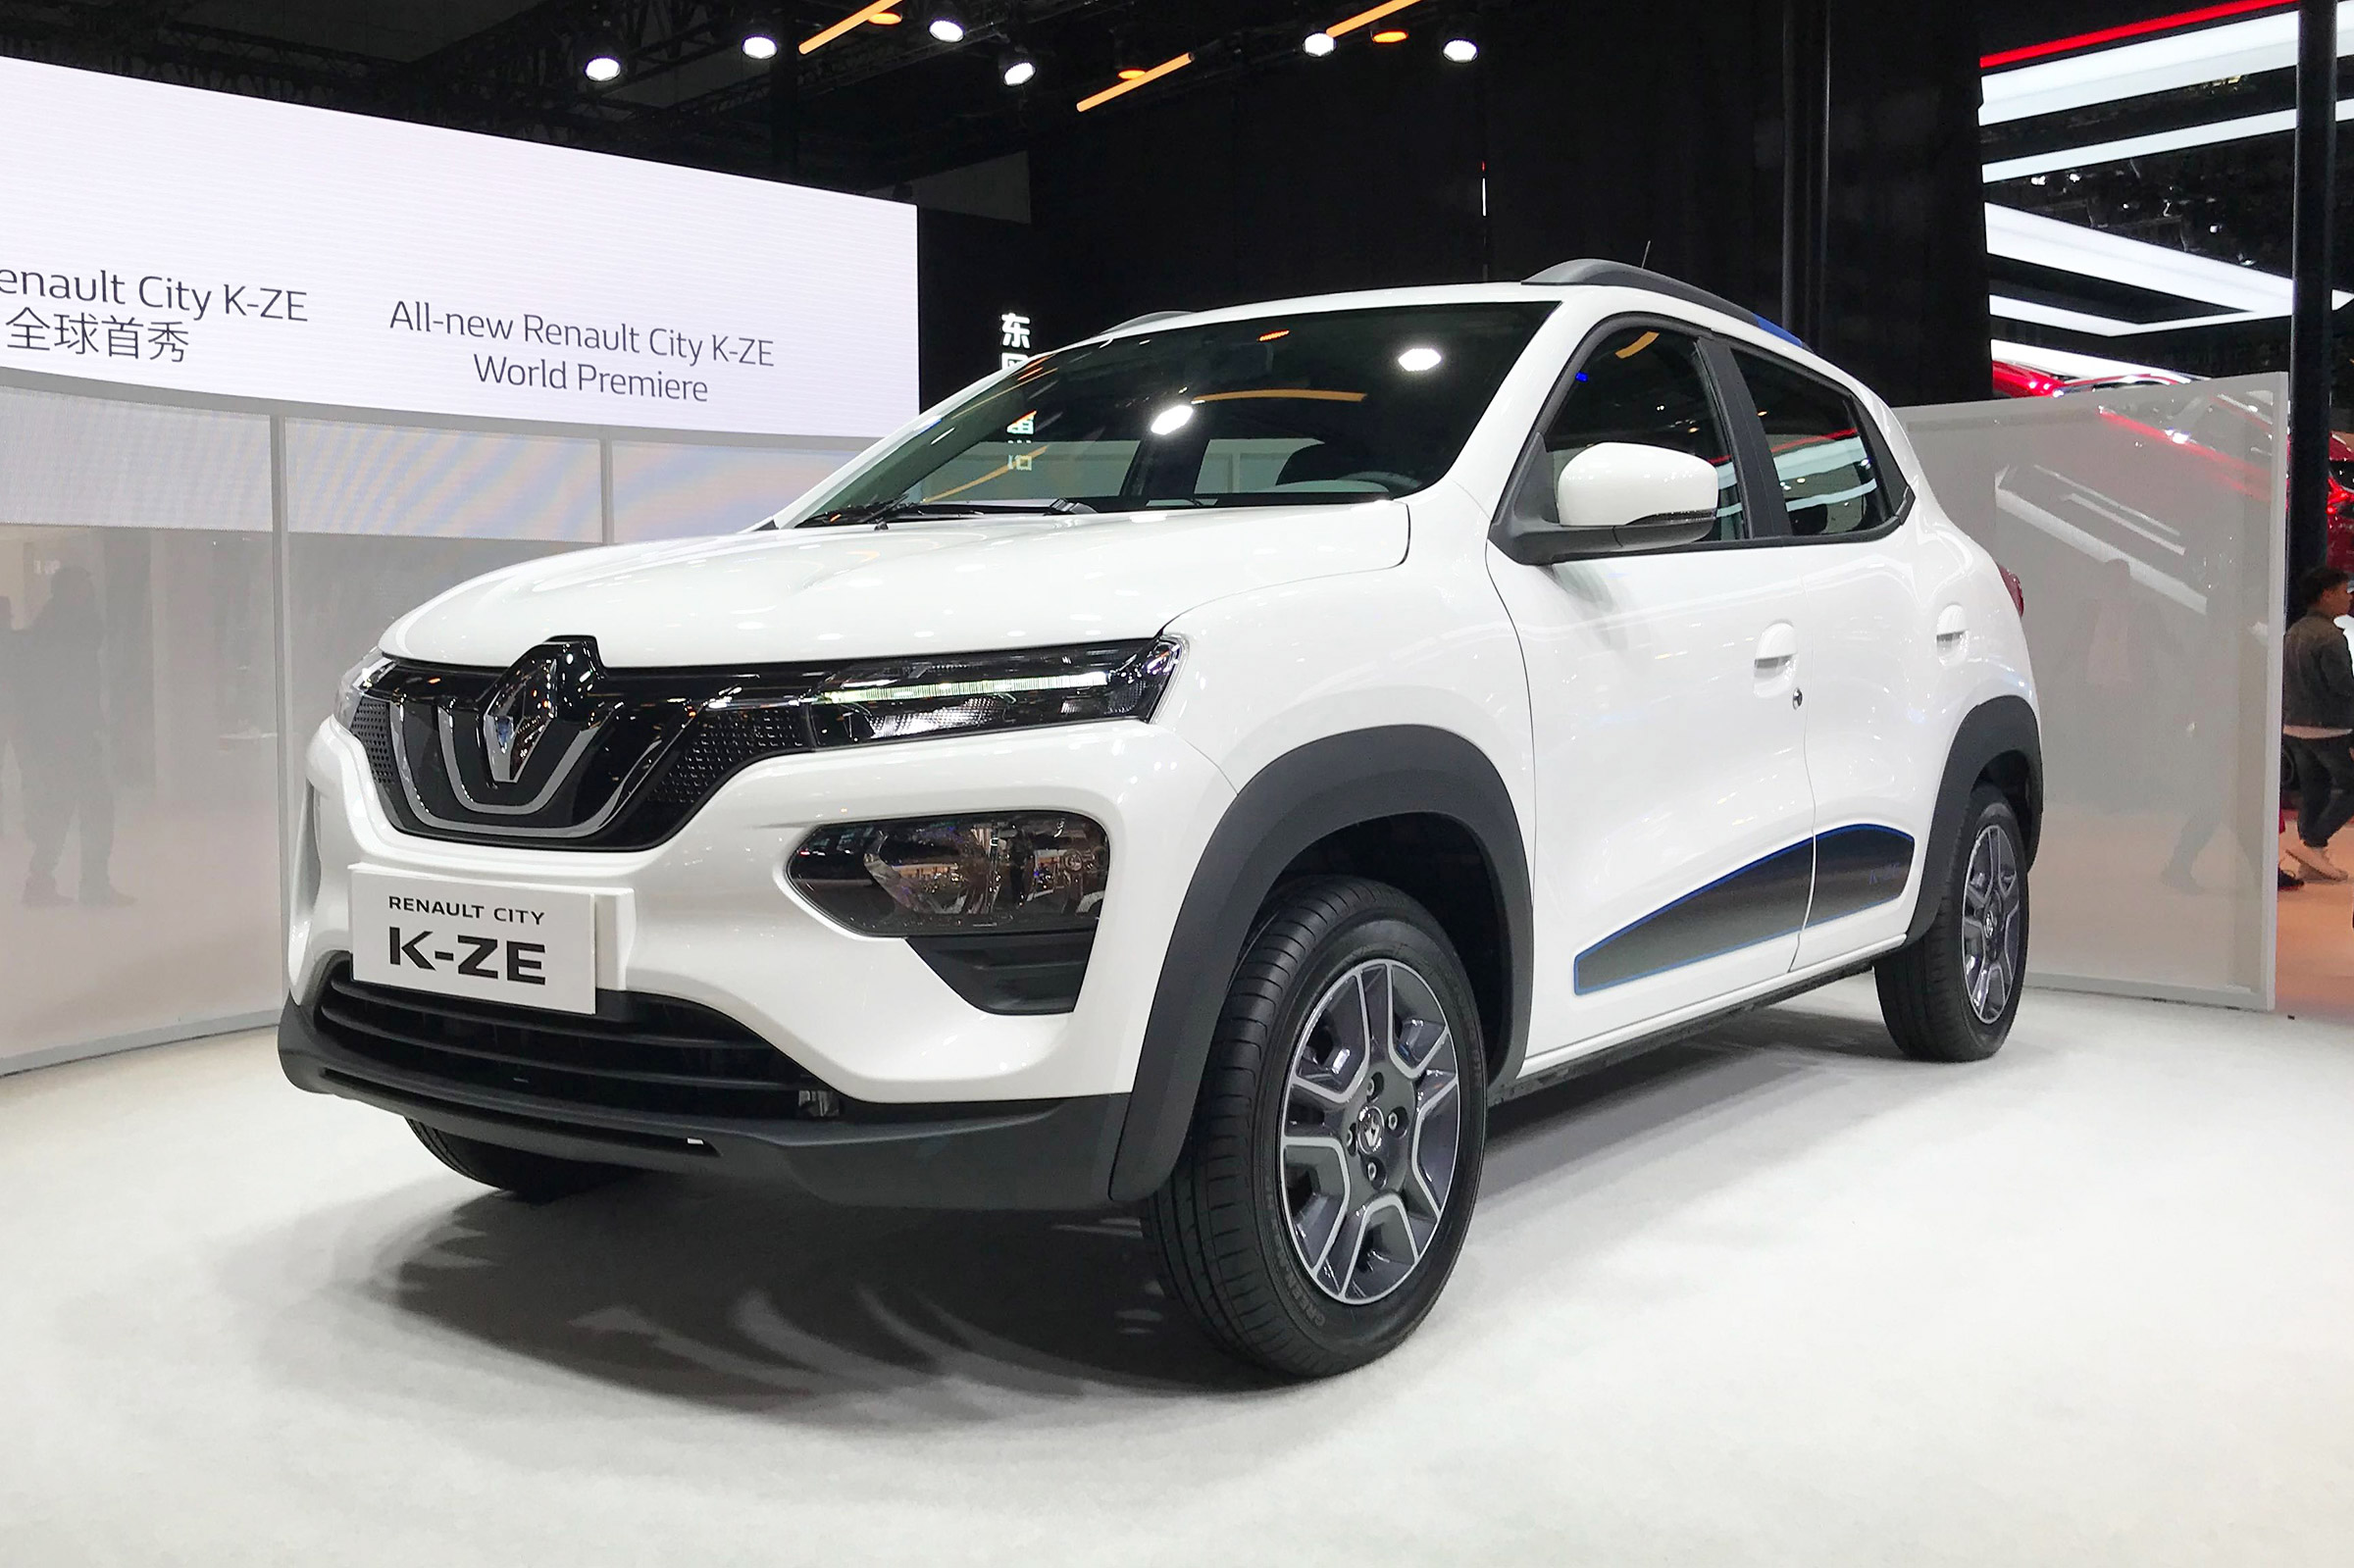 New Renault City K-ZE revealed in Shanghai as cheap 